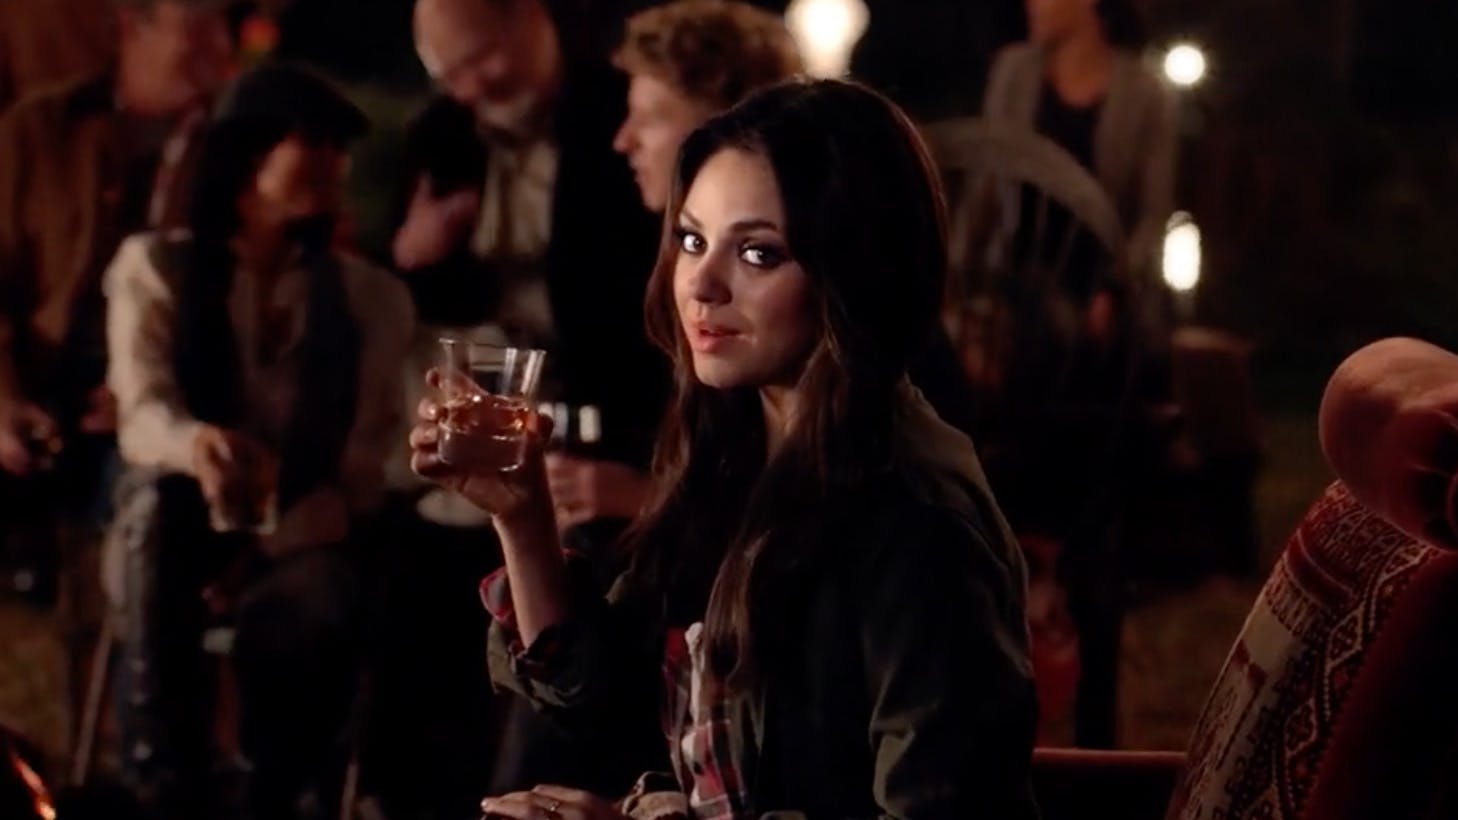 Actress Mila Kunis savors a glass of Jim Beam whiskey in a crowded room. 